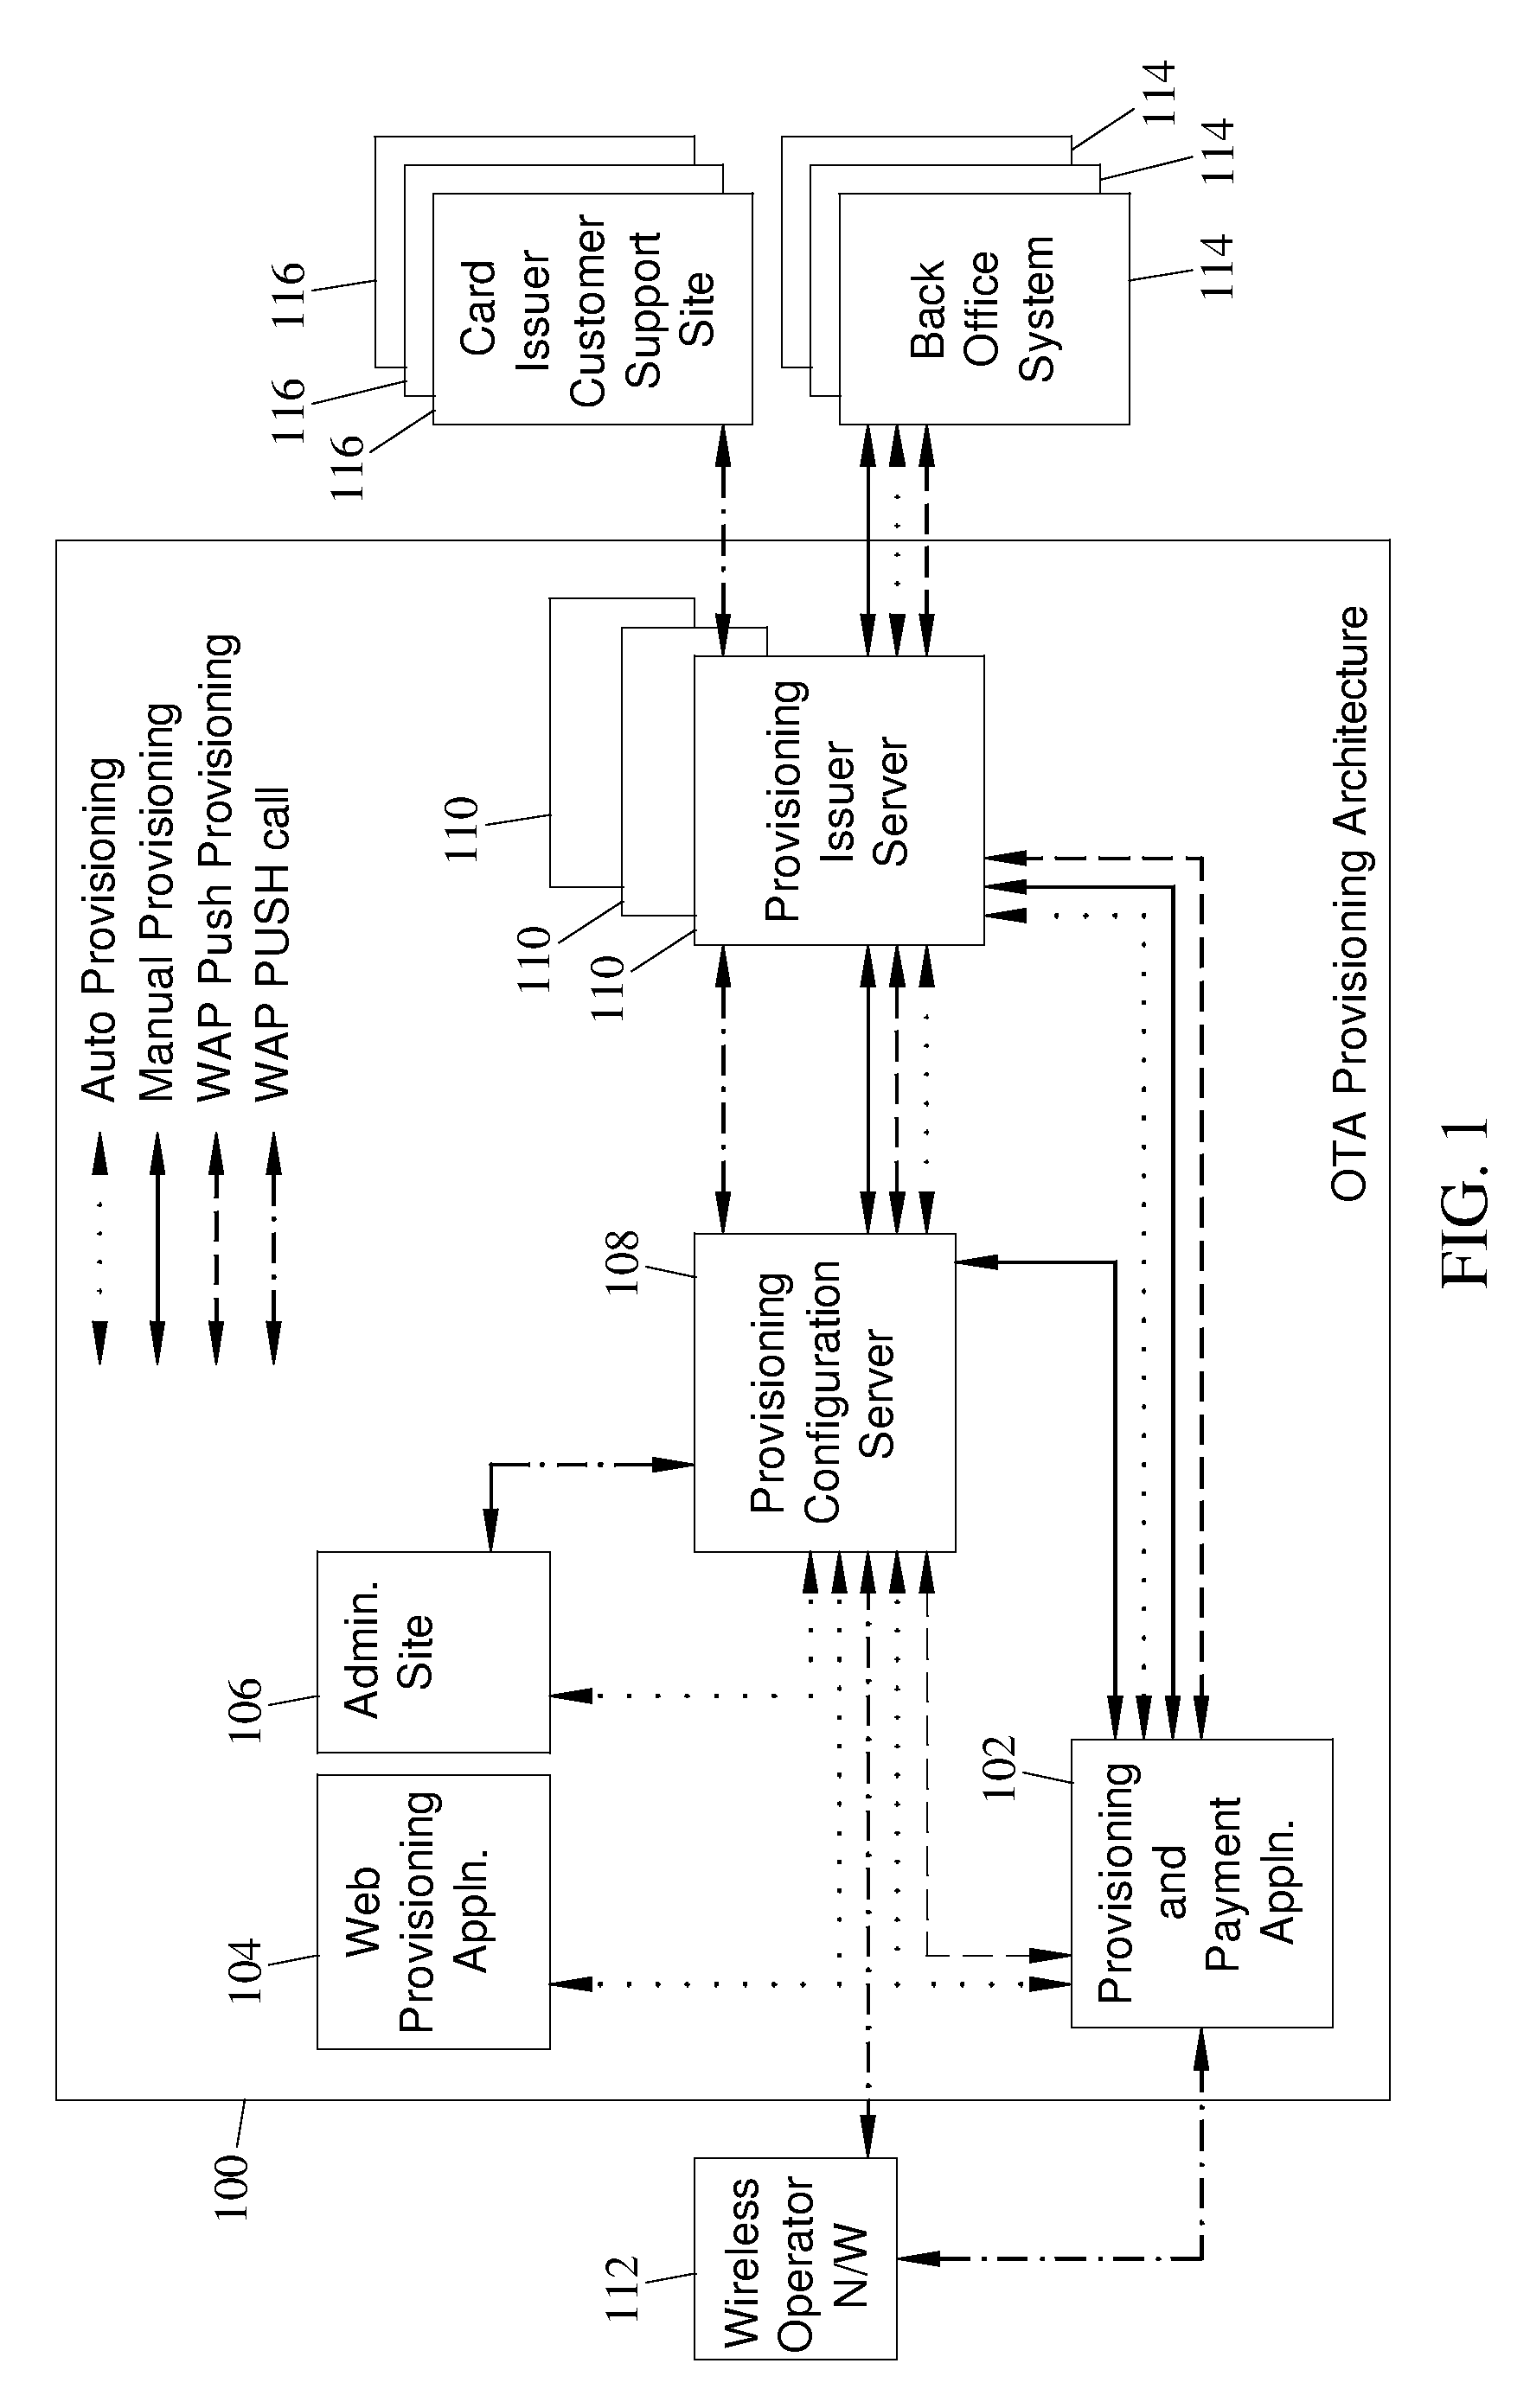 Methods, systems, and computer readable media for over the air (OTA) provisioning of soft cards on devices with wireless communications capabilities